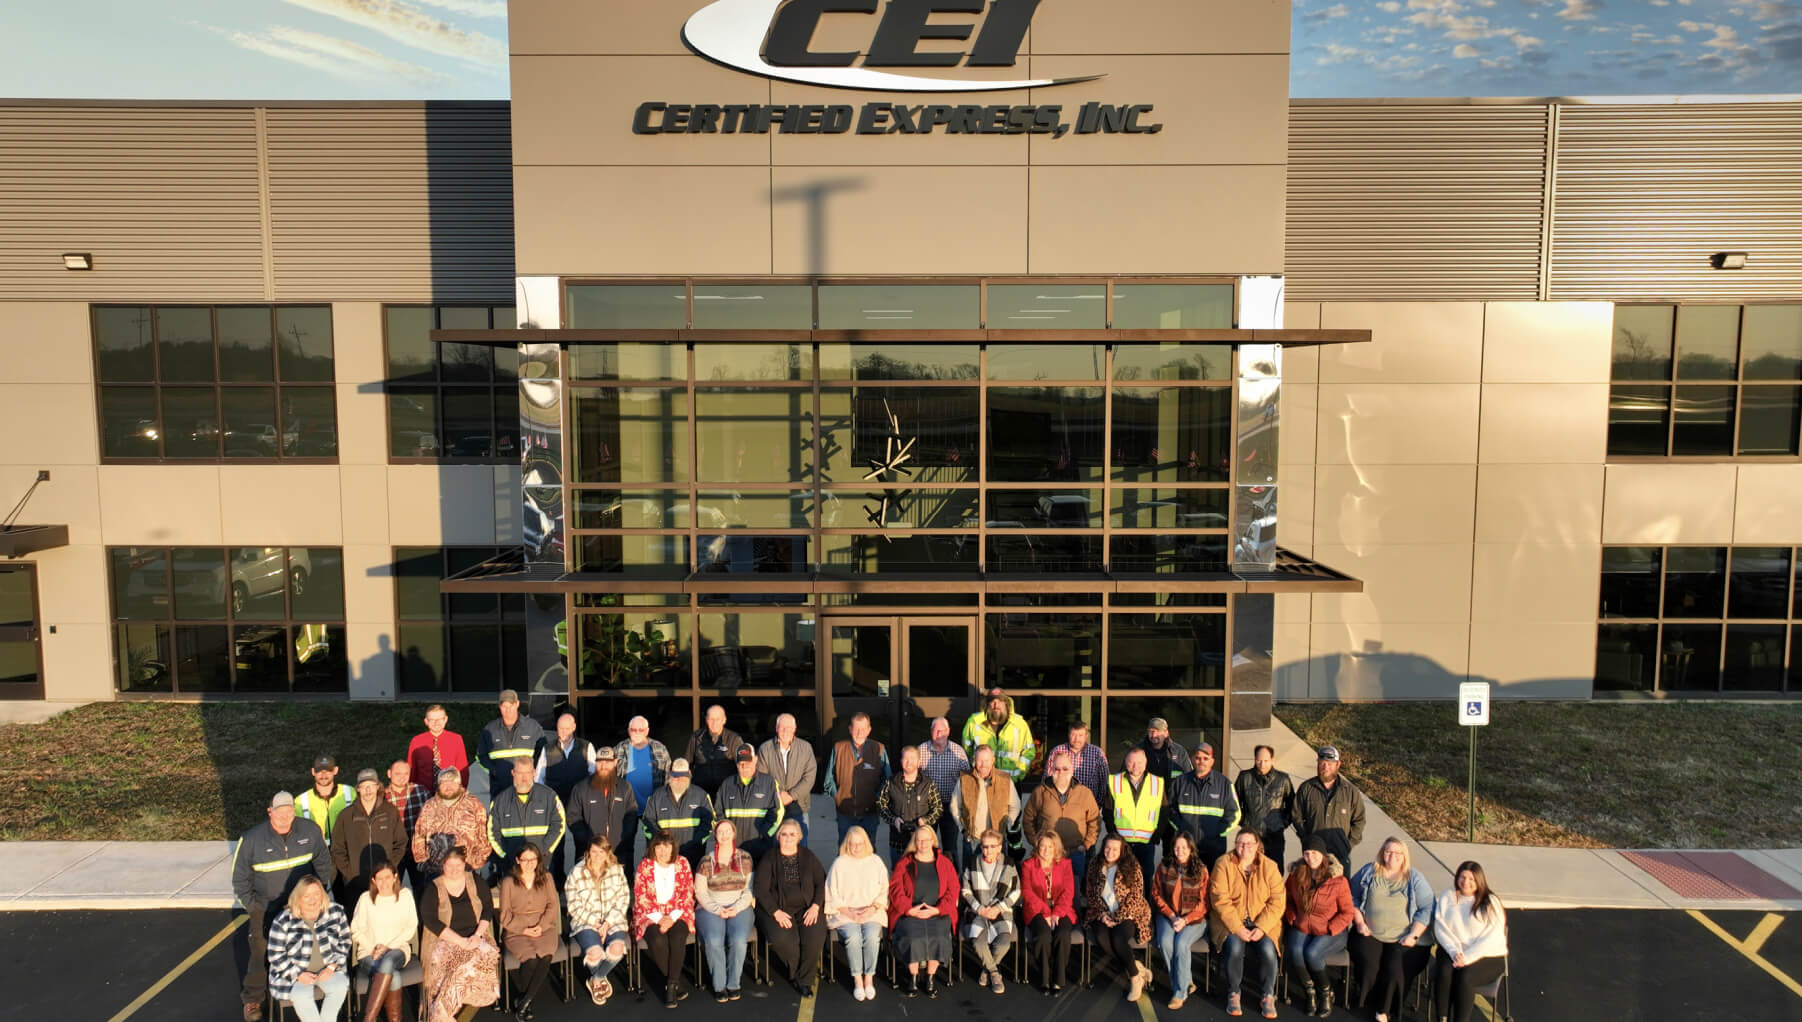 Employees stand in front of Certified Express headquarters for a group photo.